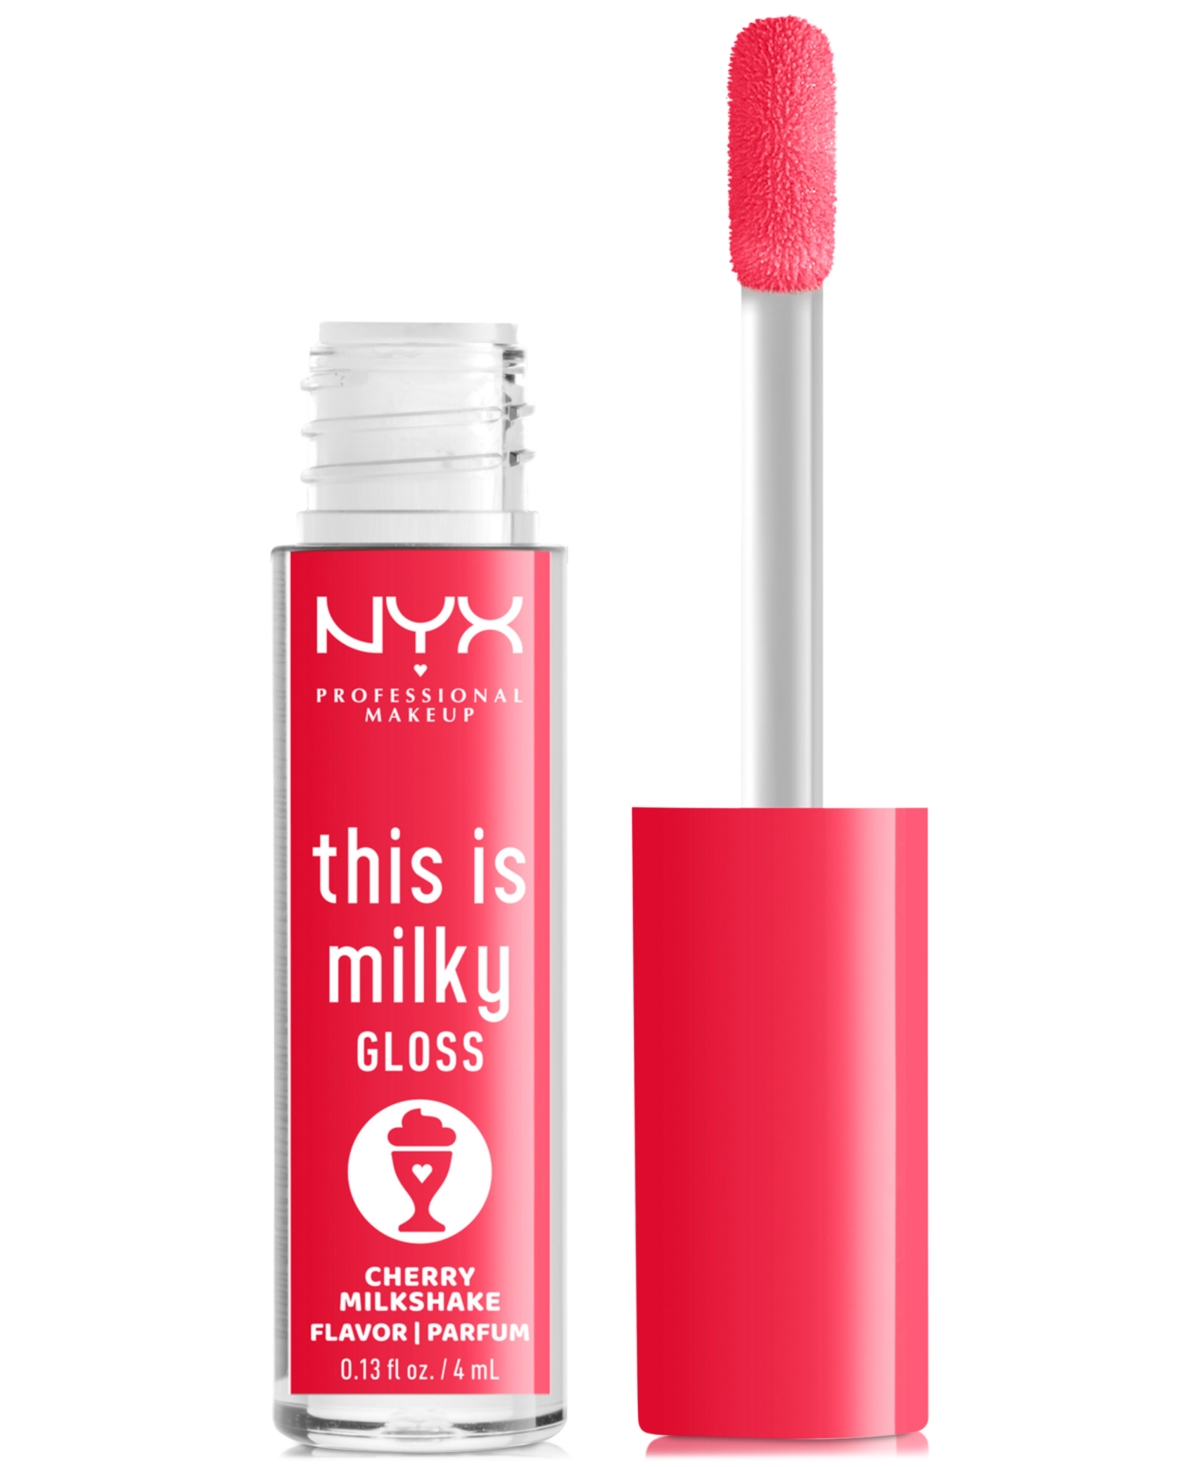 Nyx Professional Makeup This Is Milky Gloss In Cherry Milk Shake